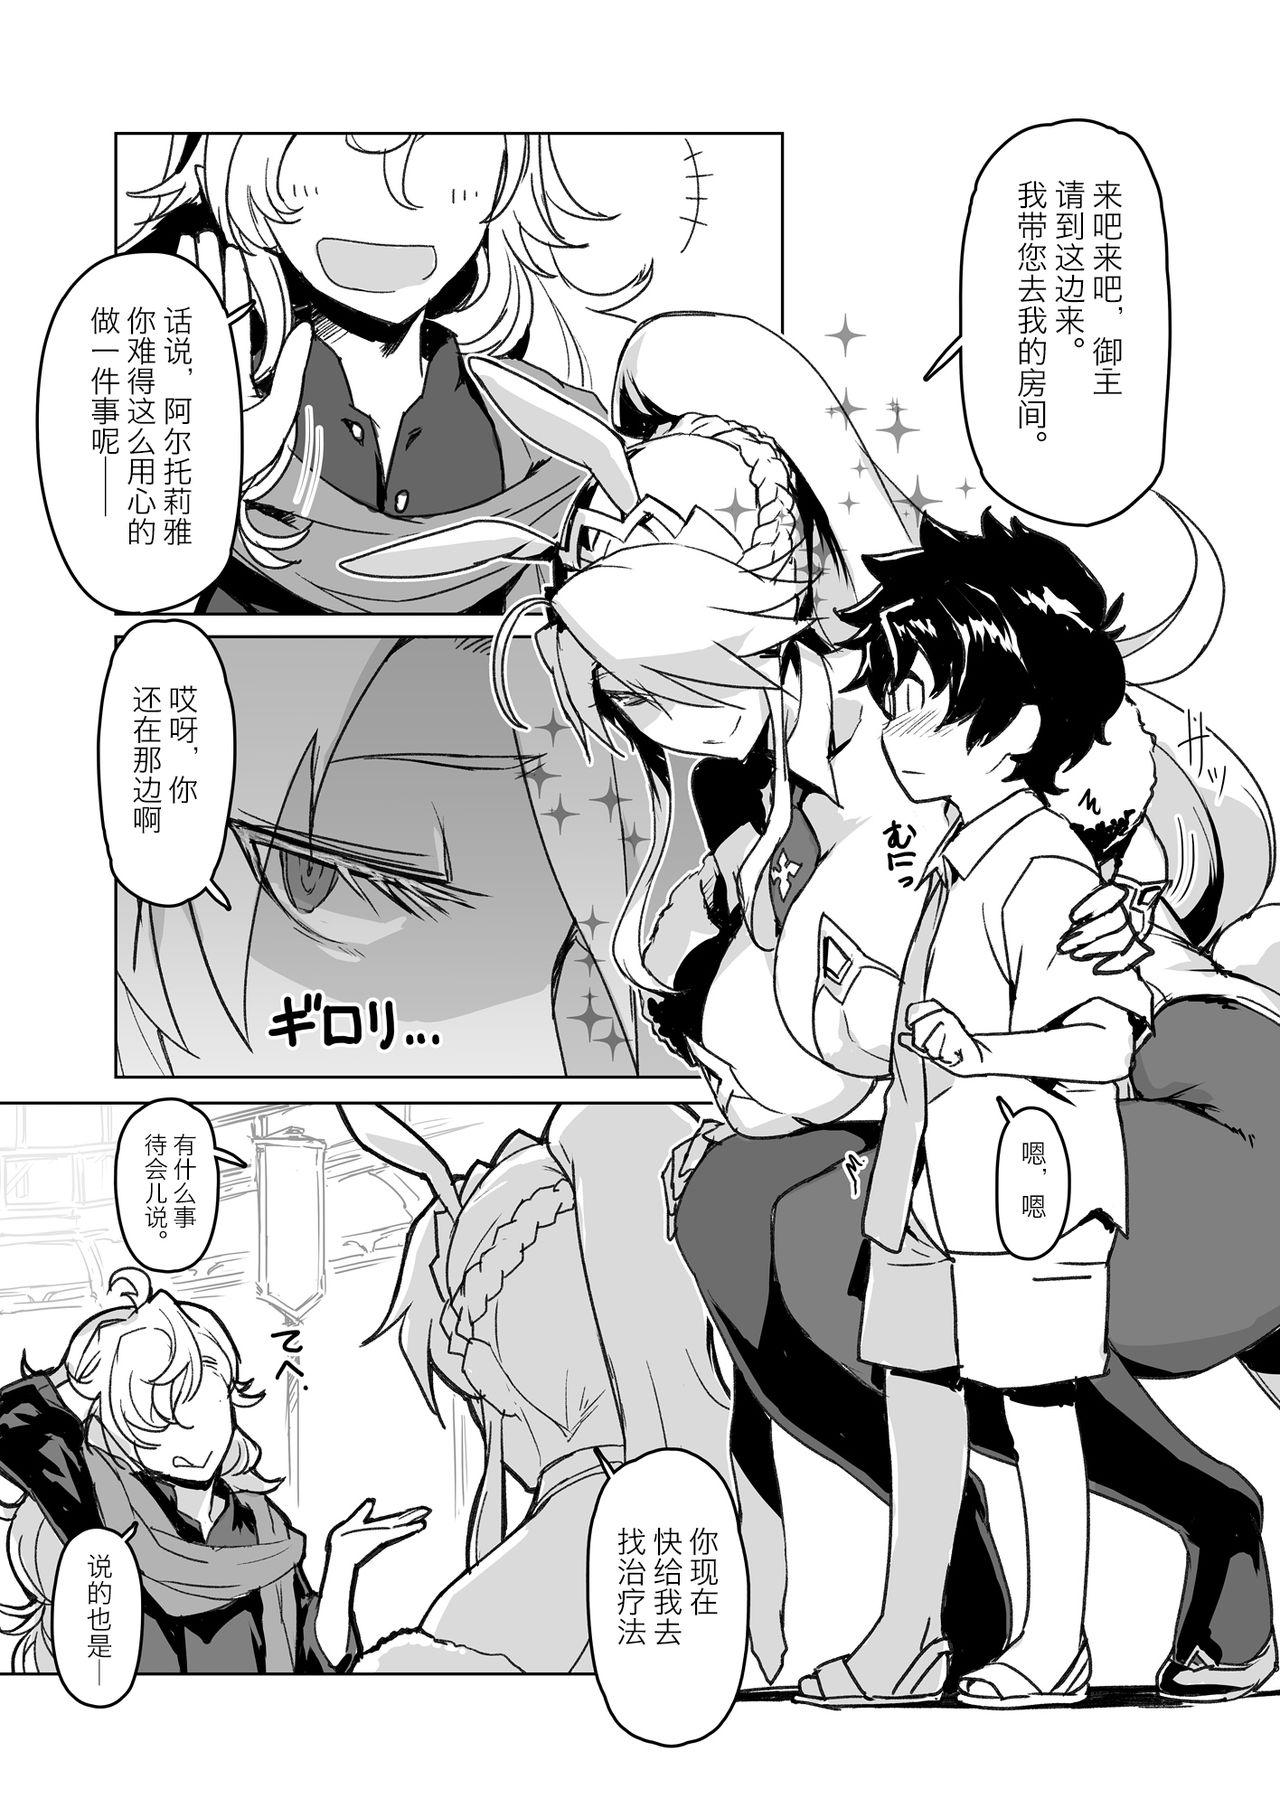 Best Blowjob Melancholic Summer - Fate grand order Cheating Wife - Page 4